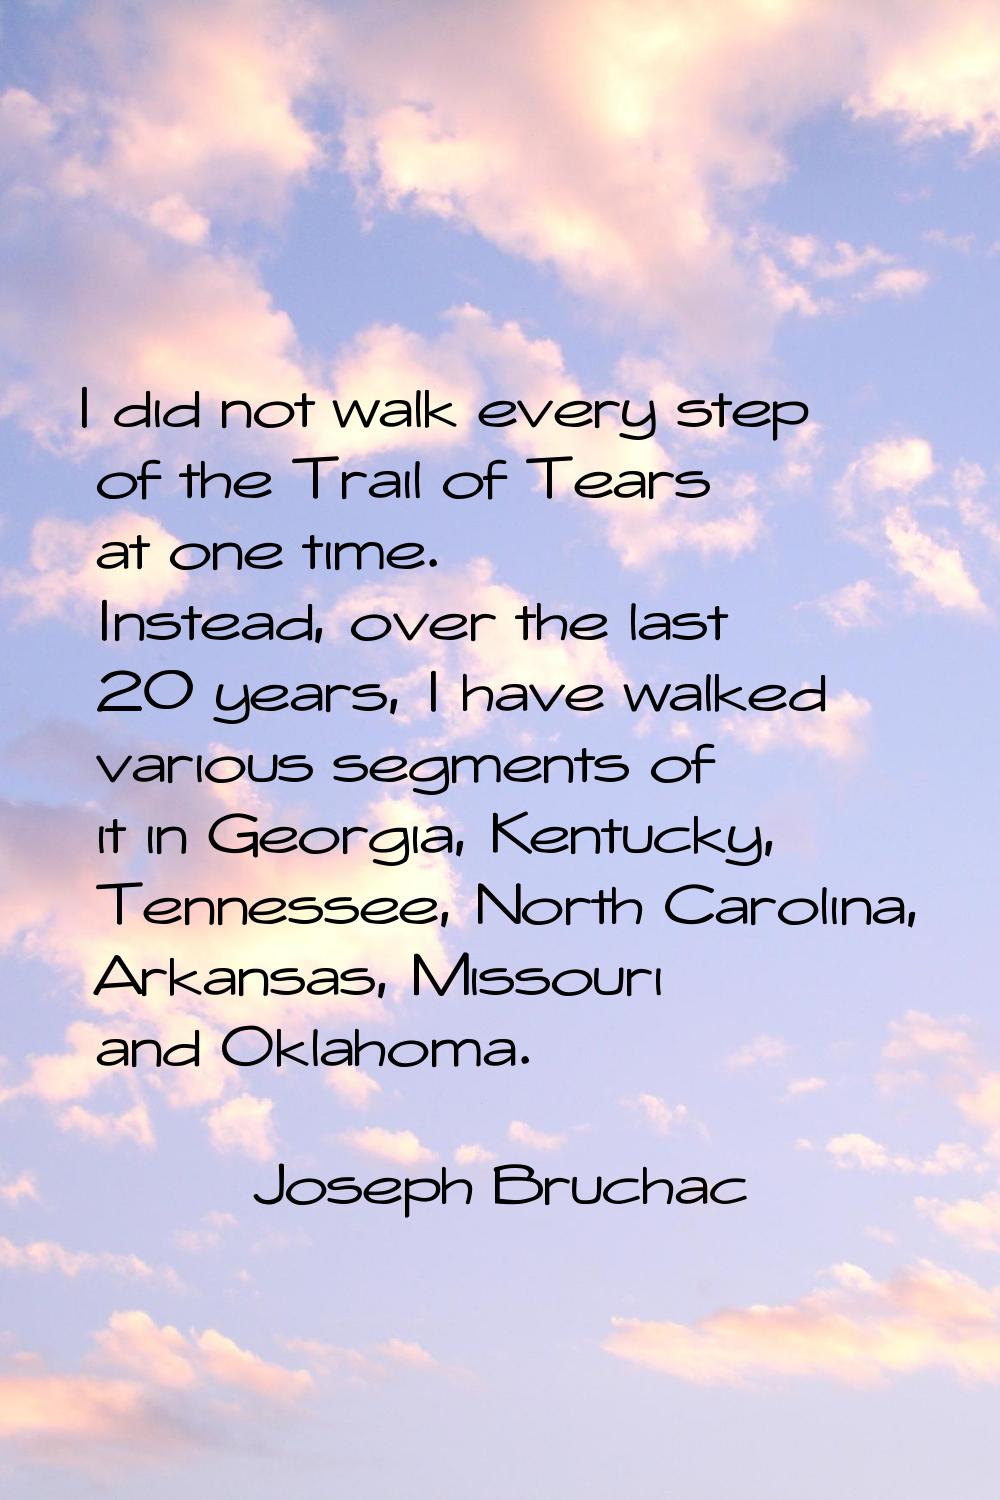 I did not walk every step of the Trail of Tears at one time. Instead, over the last 20 years, I hav